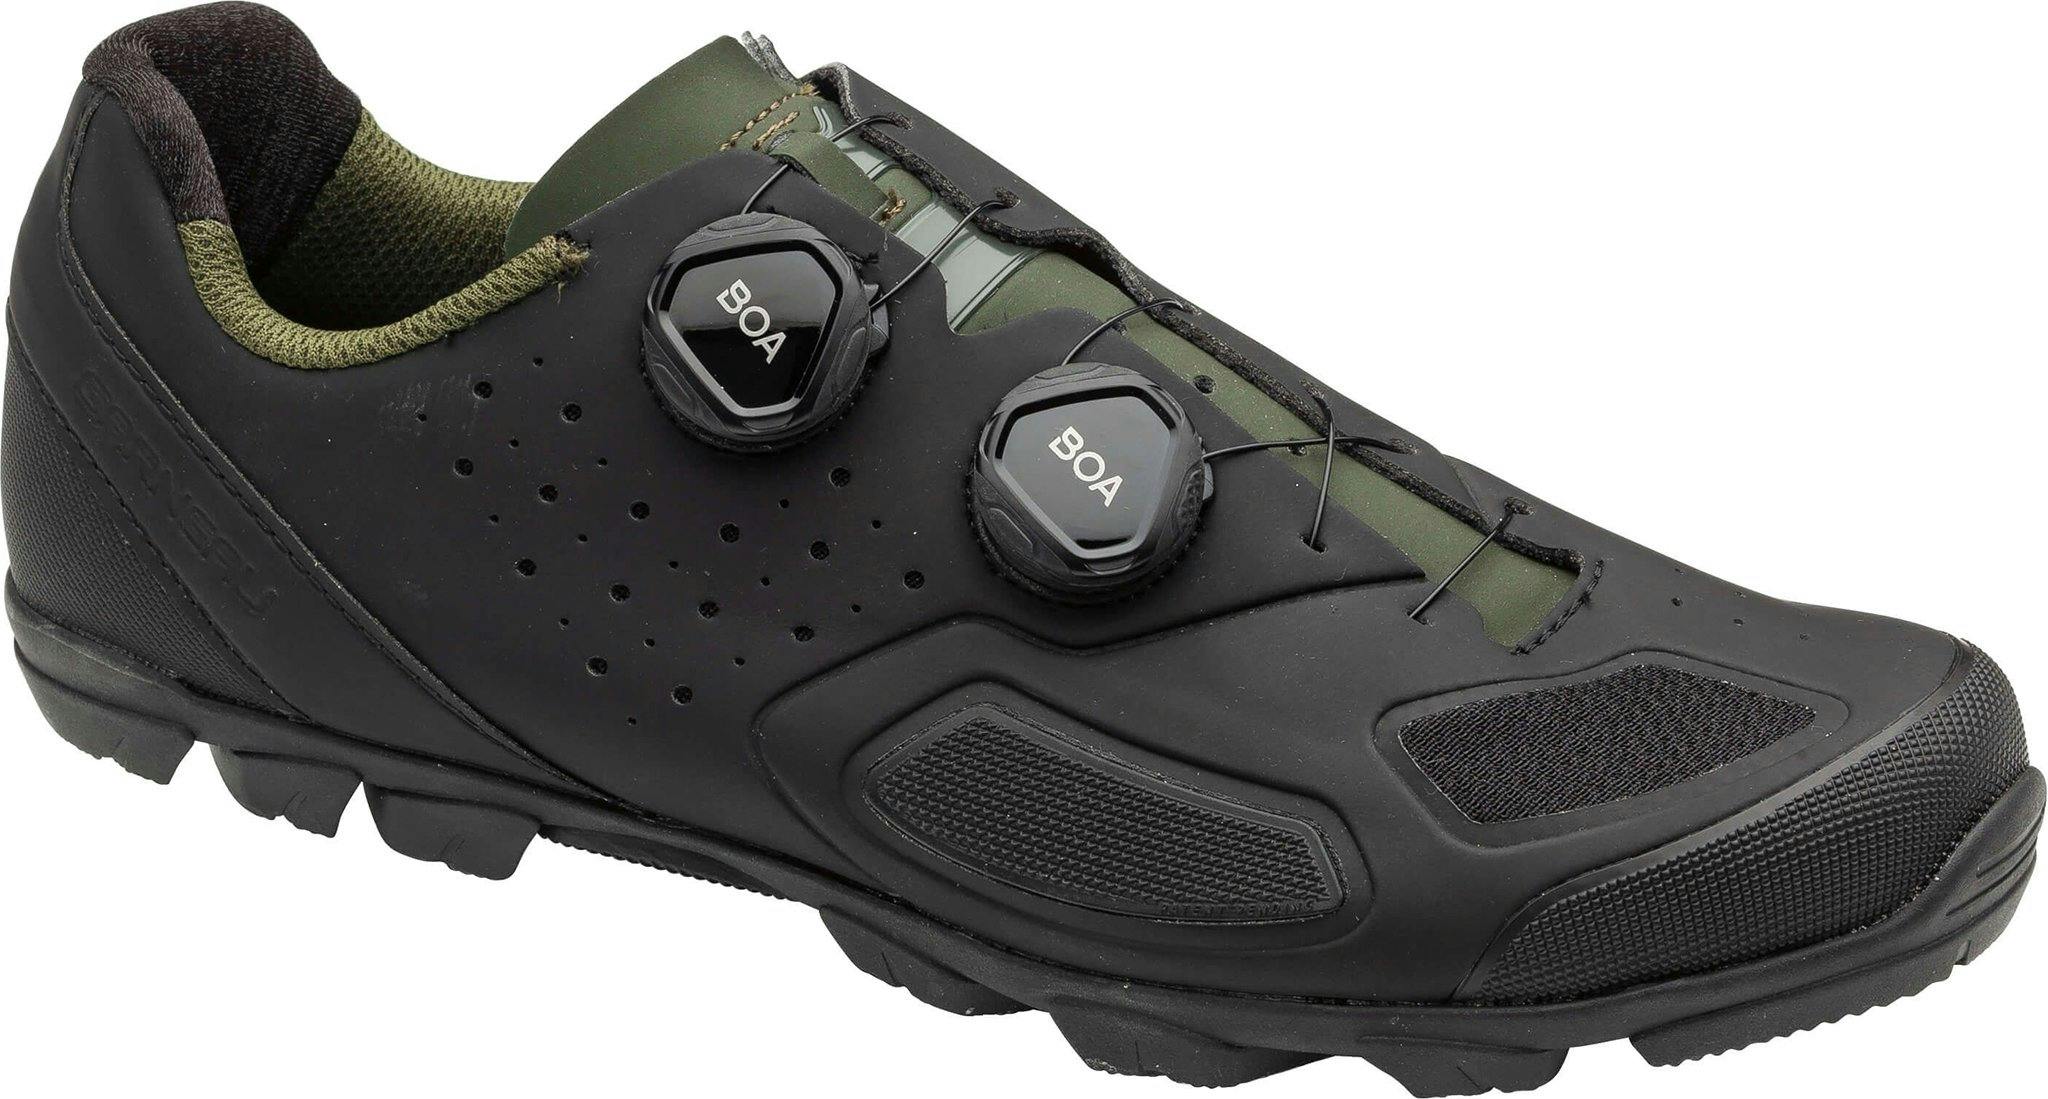 Product image for Baryum Cycling Shoes - Men's